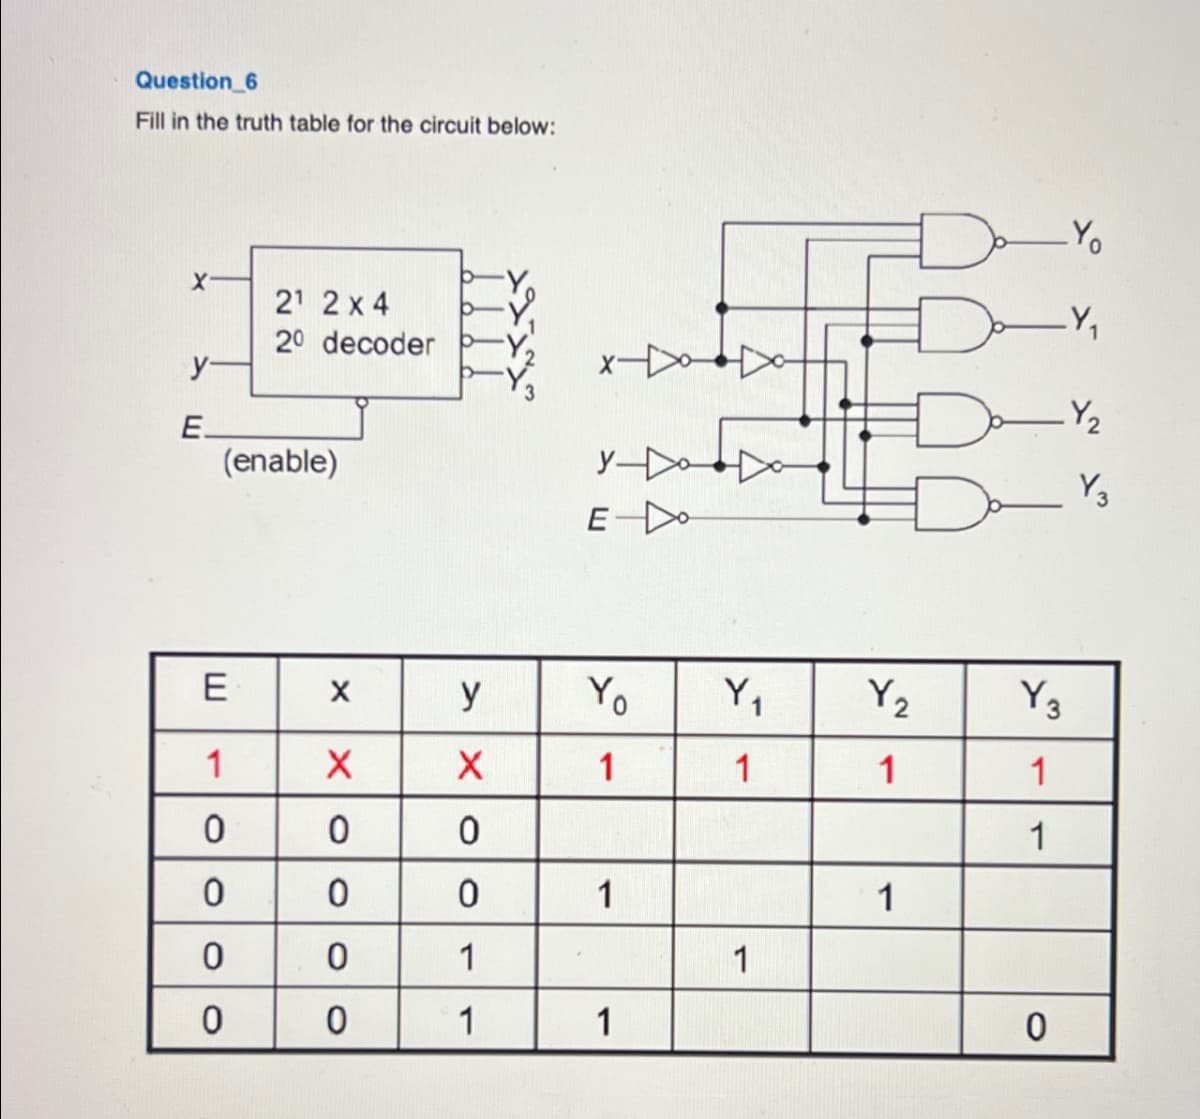 Question 6
Fill in the truth table for the circuit below:
X
E
21 2x4
20 decoder
(enable)
Yo
Y₂
yo
Y₁₂
E
E
X
y
Yo
Y₁
Y₂
Y3
1
✗
X
1
1
1
1
0
0
0
1
0
0
0
1
1
0
0
1
1
0
0
1
1
0